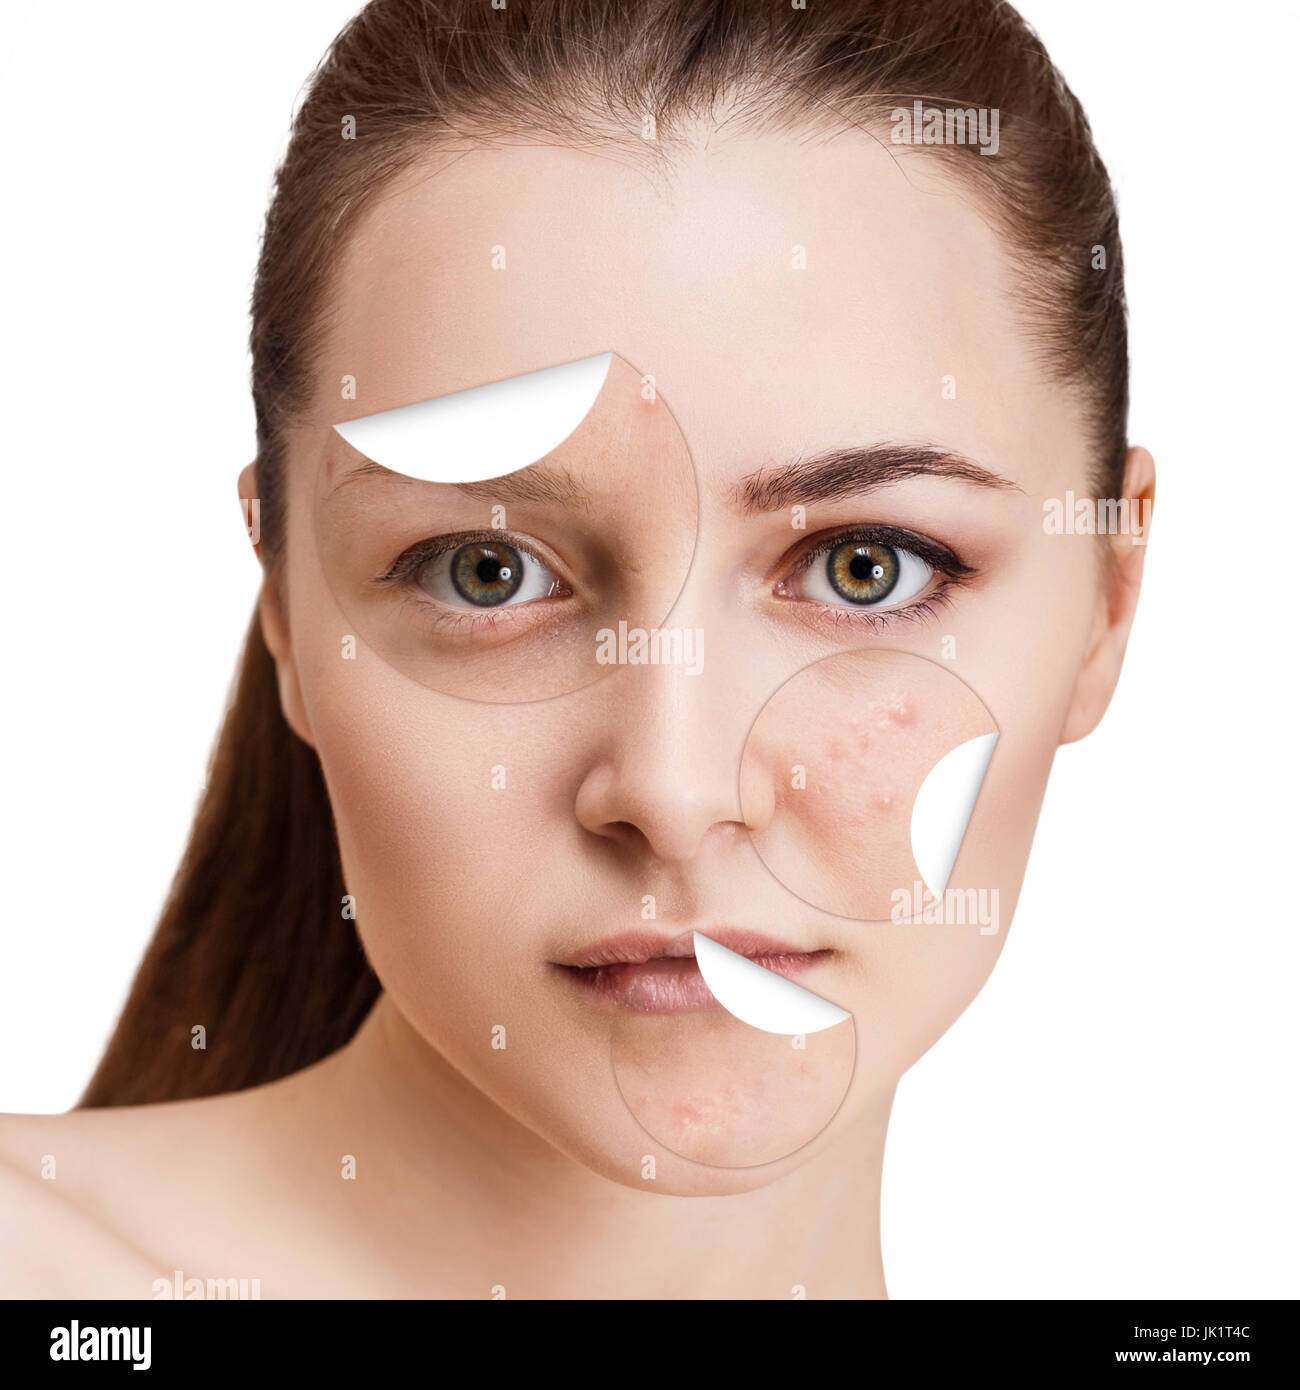 Circles with acne unstick from healthy skin. Stock Photo